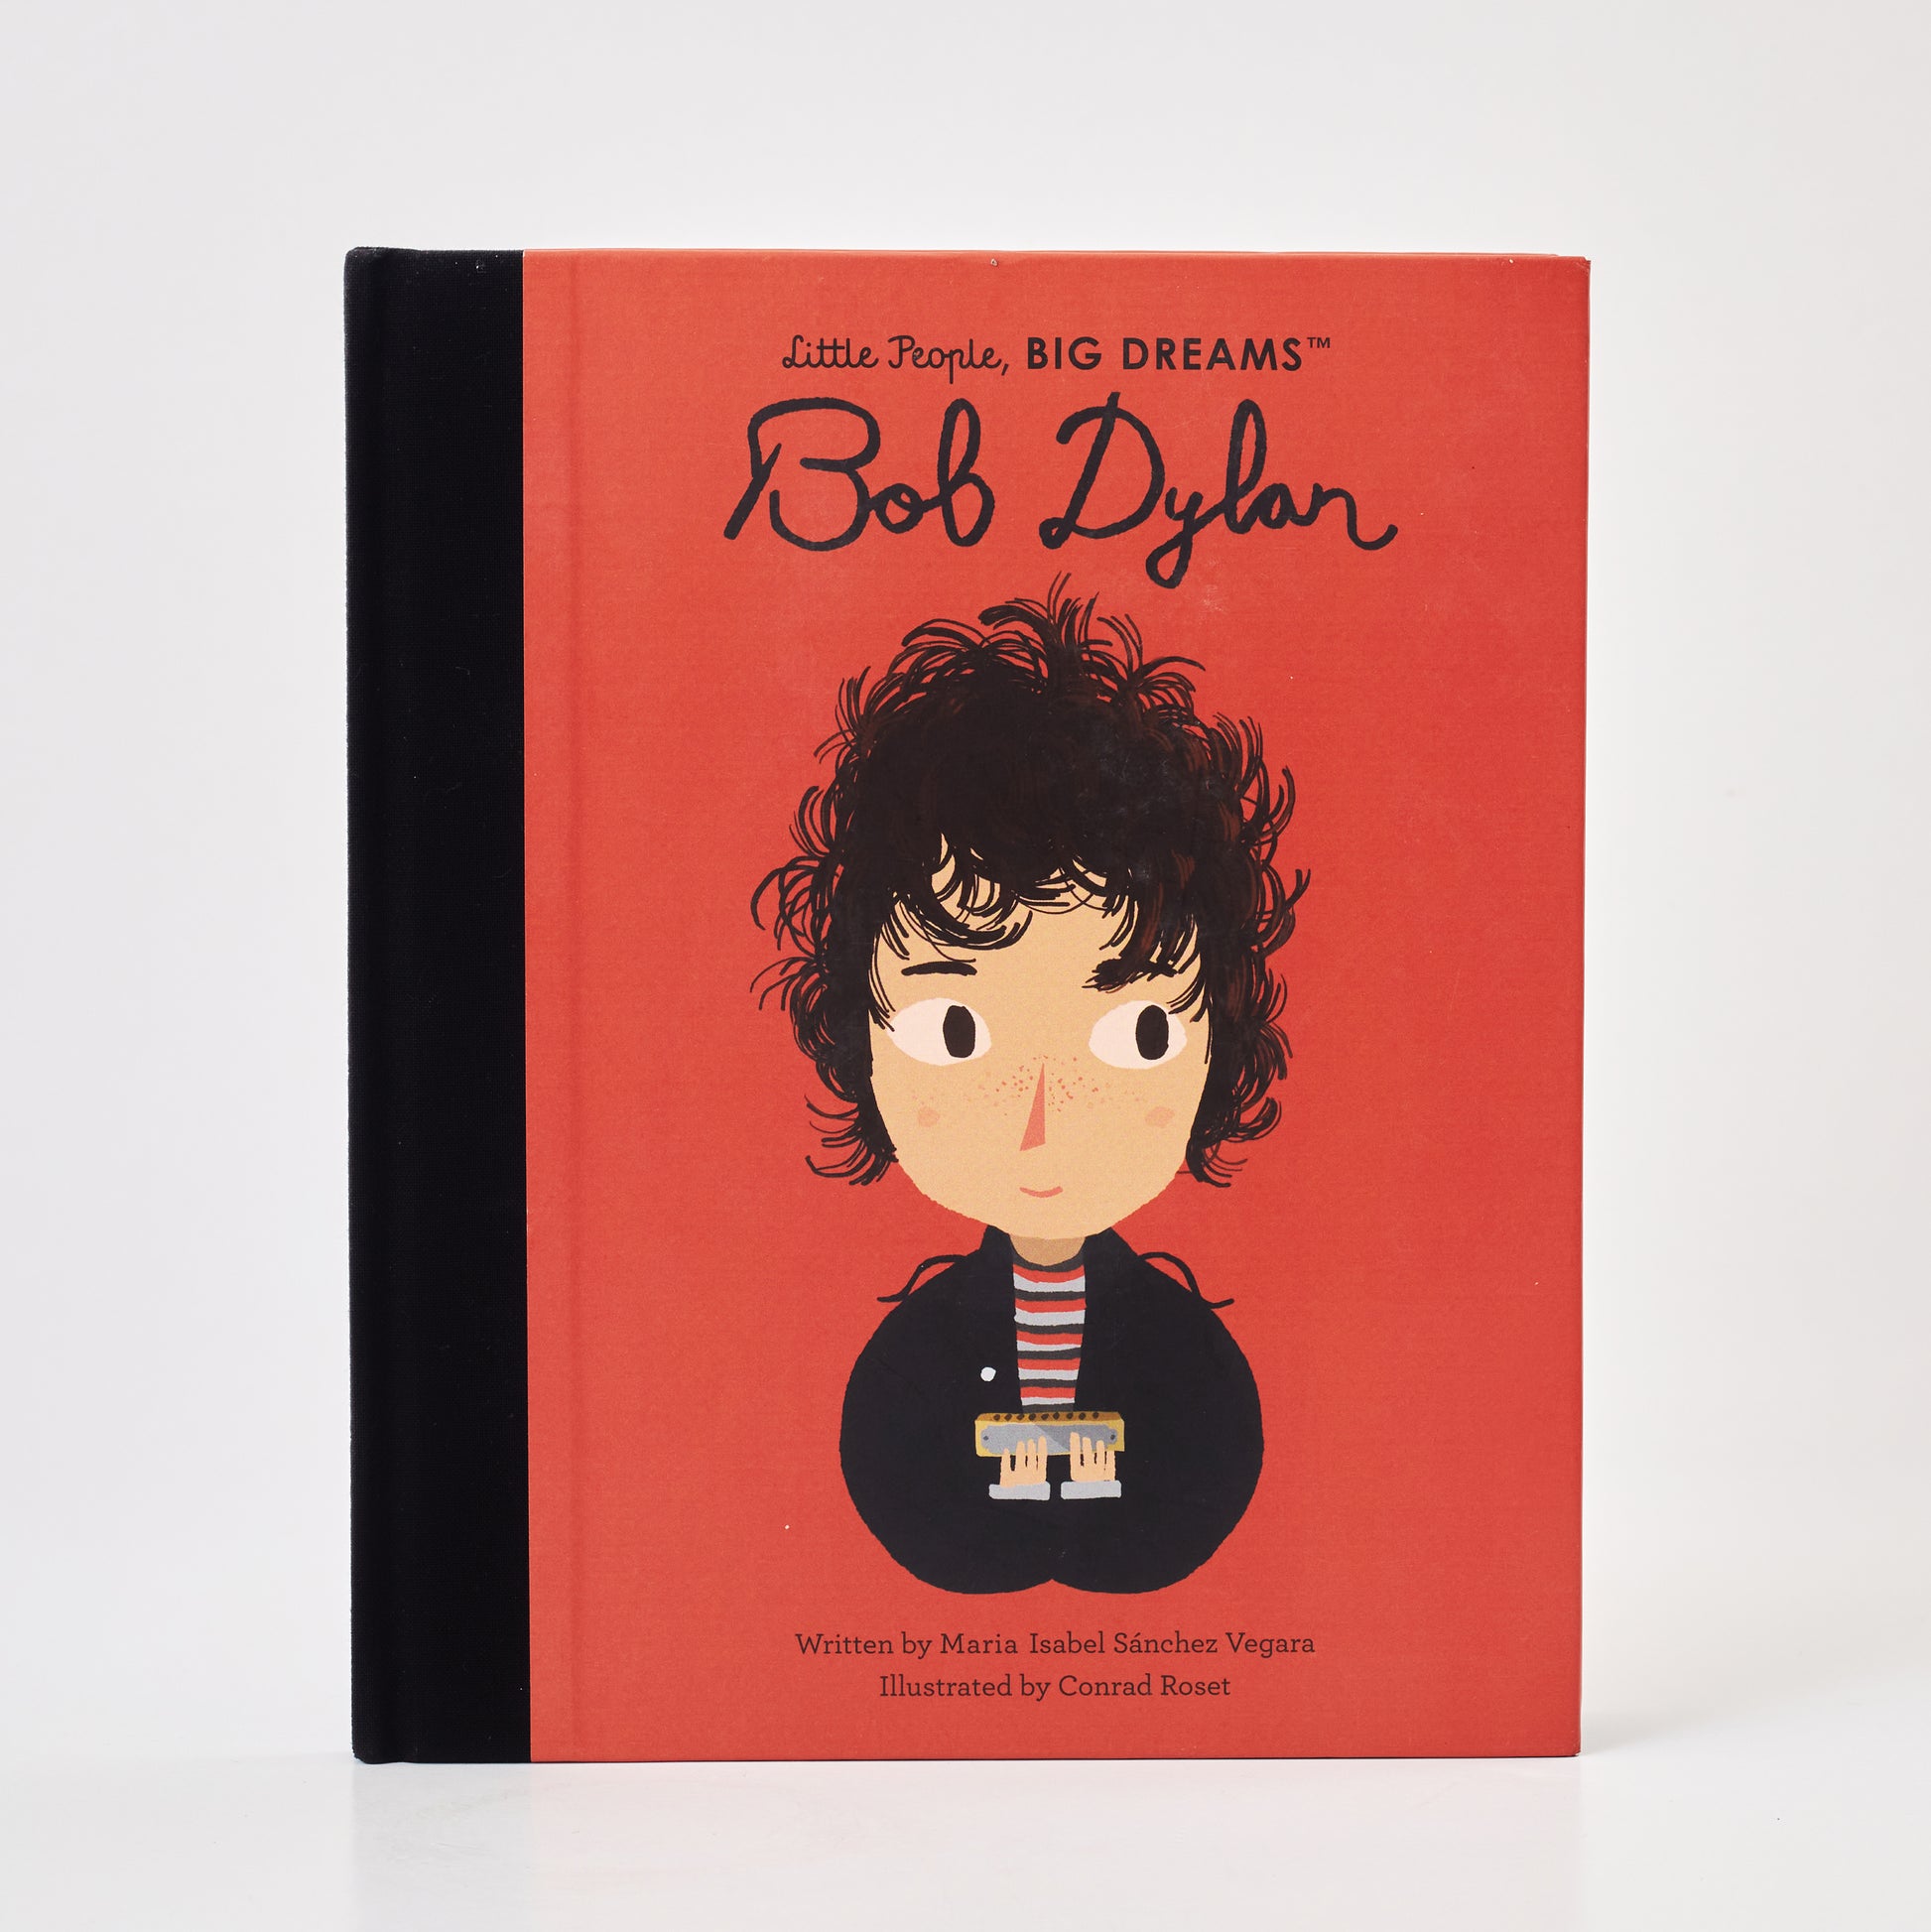 Meet Bob Dylan, the iconic singer-songwriter, poet, and artist. Bob Dylan was born in Duluth, Minnesota. As a teenager, he played in various bands and, over time, his interest in music deepened, with a particular passion for American folk music and blues. Dylan moved to New York City in 1961, where he began to perform poetry and music in clubs and cafés in Greenwich Village. There, he recorded a number of albums that made him one of the most influential musicians of history.